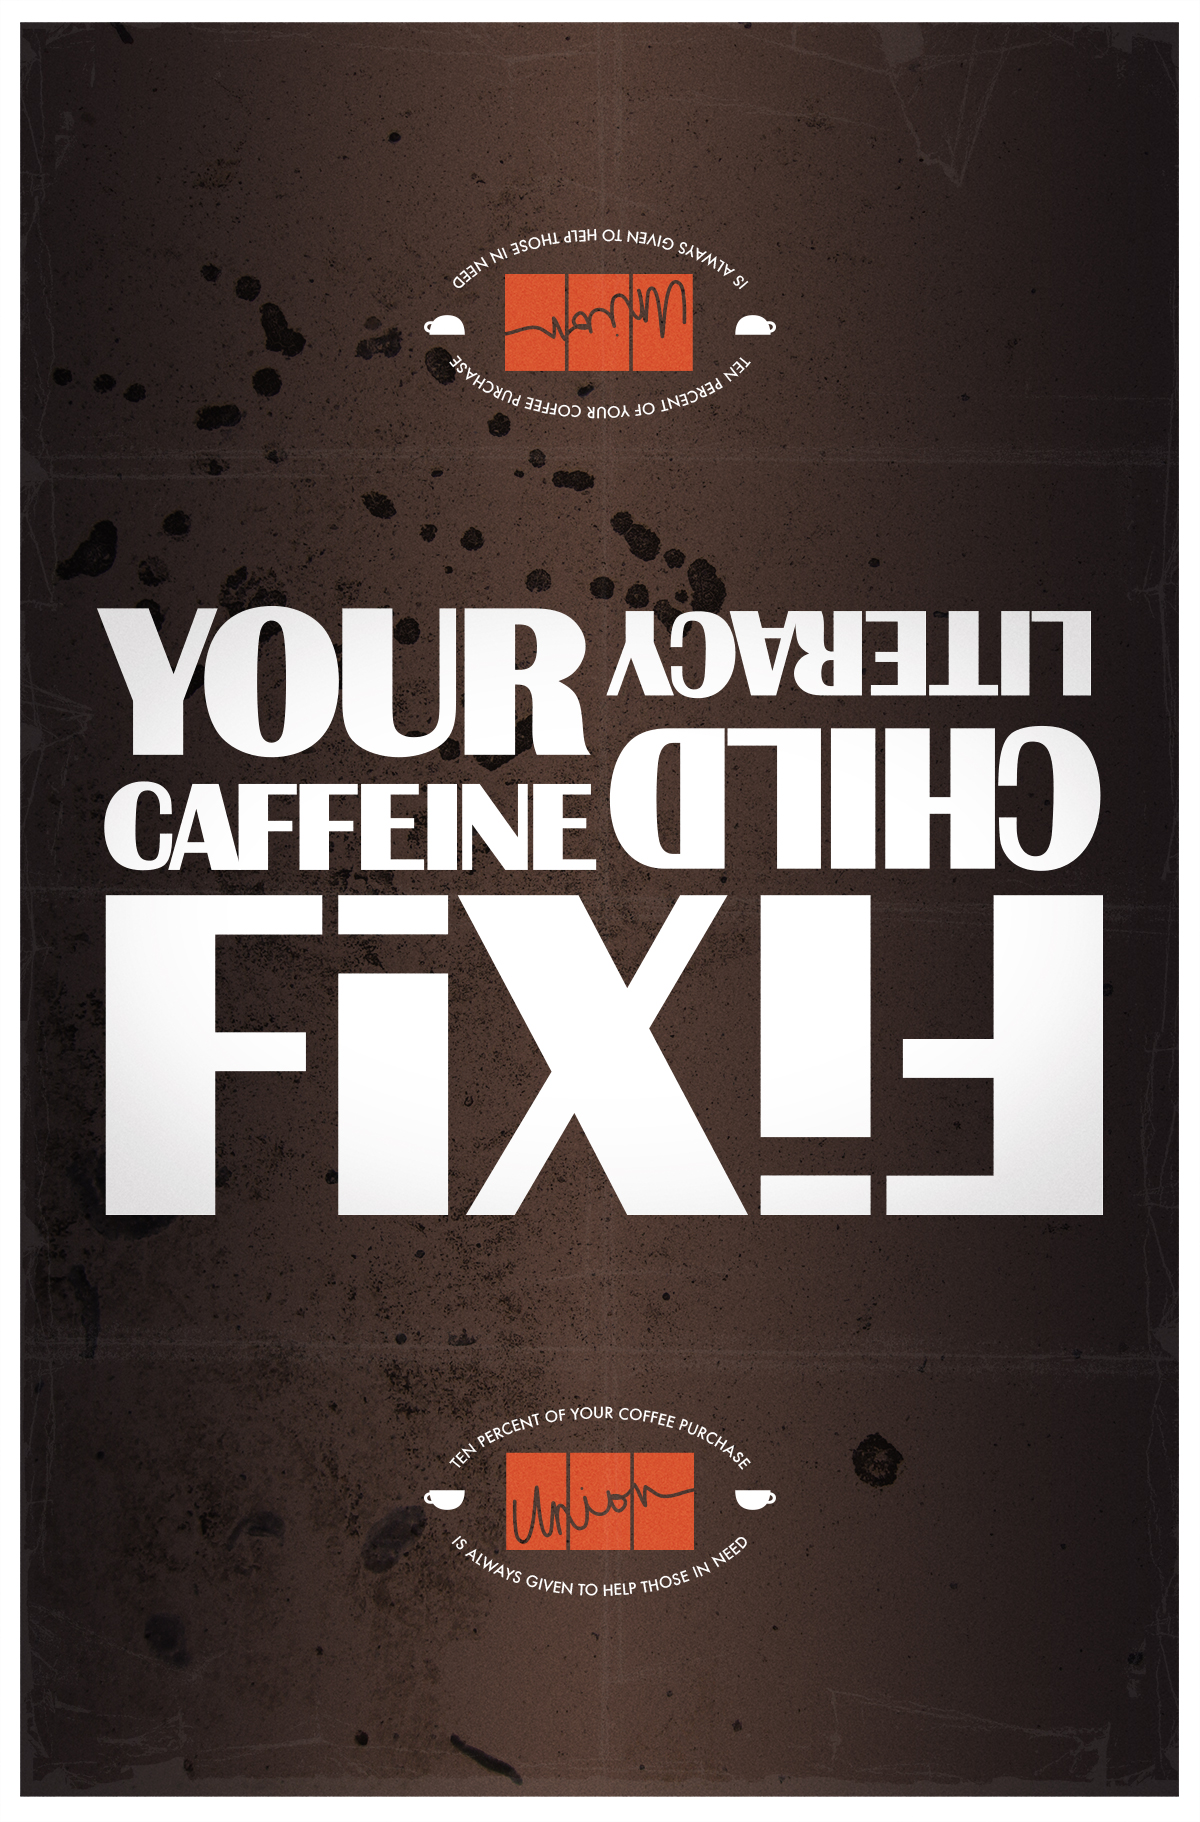 Union Coffee Poster for Child Literacy - Reversible: Your Caffeine Fix/Fix Child Literacy by Tidal Wave Marketing